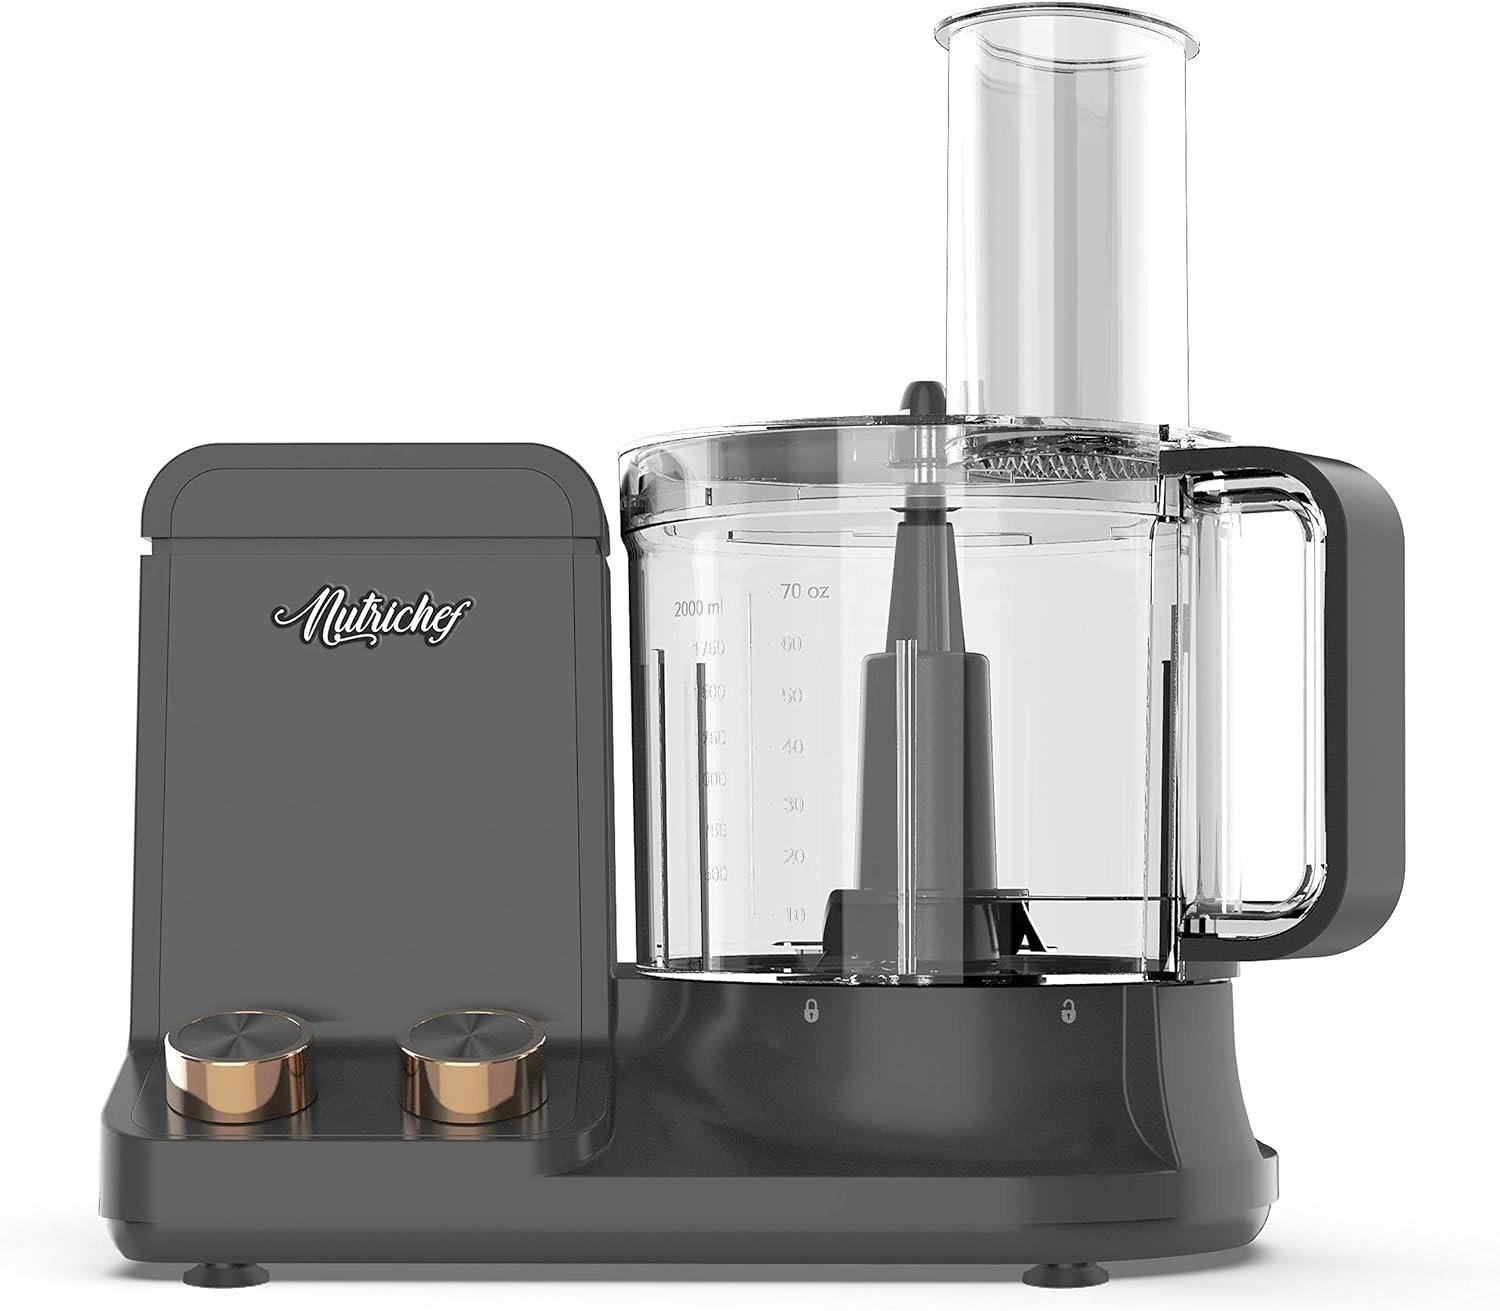 NutriChef NCFPG9 Multipurpose  Ultra Quiet Powerful Motor, Includes 6 Attachment Blades 12 Cup Multifunction Food Processor, Up to 2L Capacity, Pre-Set Speed Function Black Chrome, Space Gray